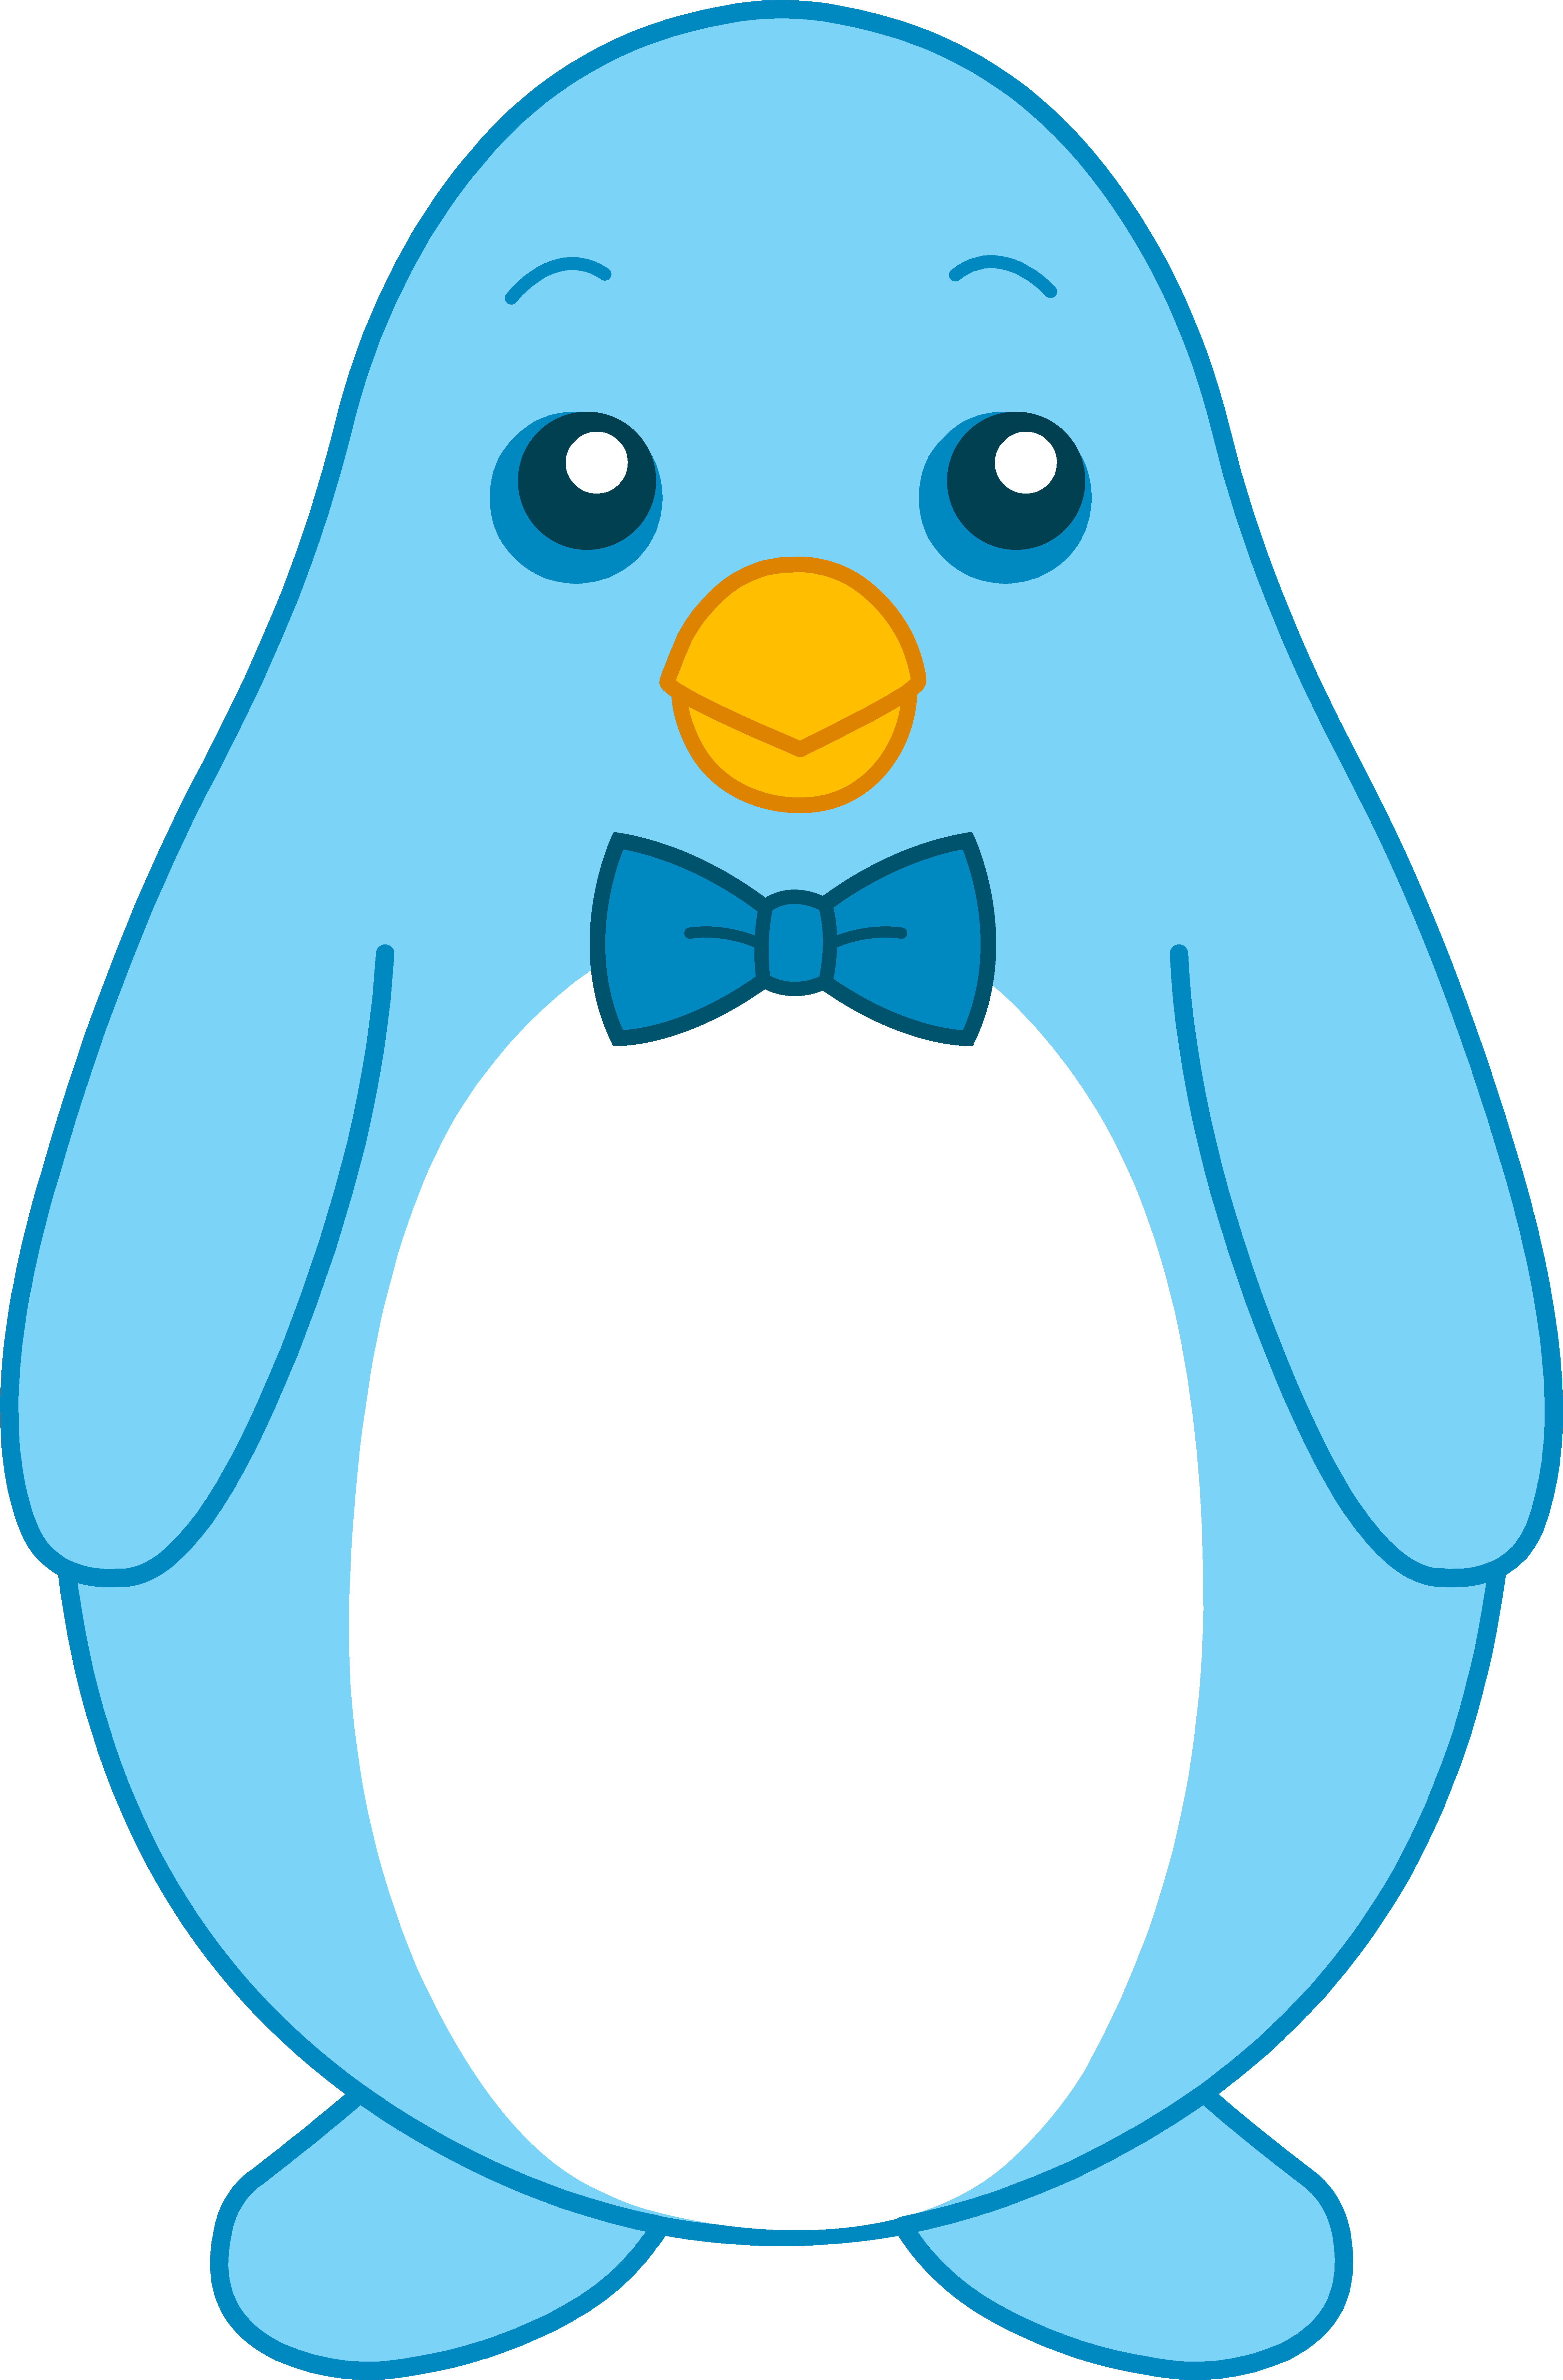 Little Blue Penguin With Bow Tie - Free Clip Art